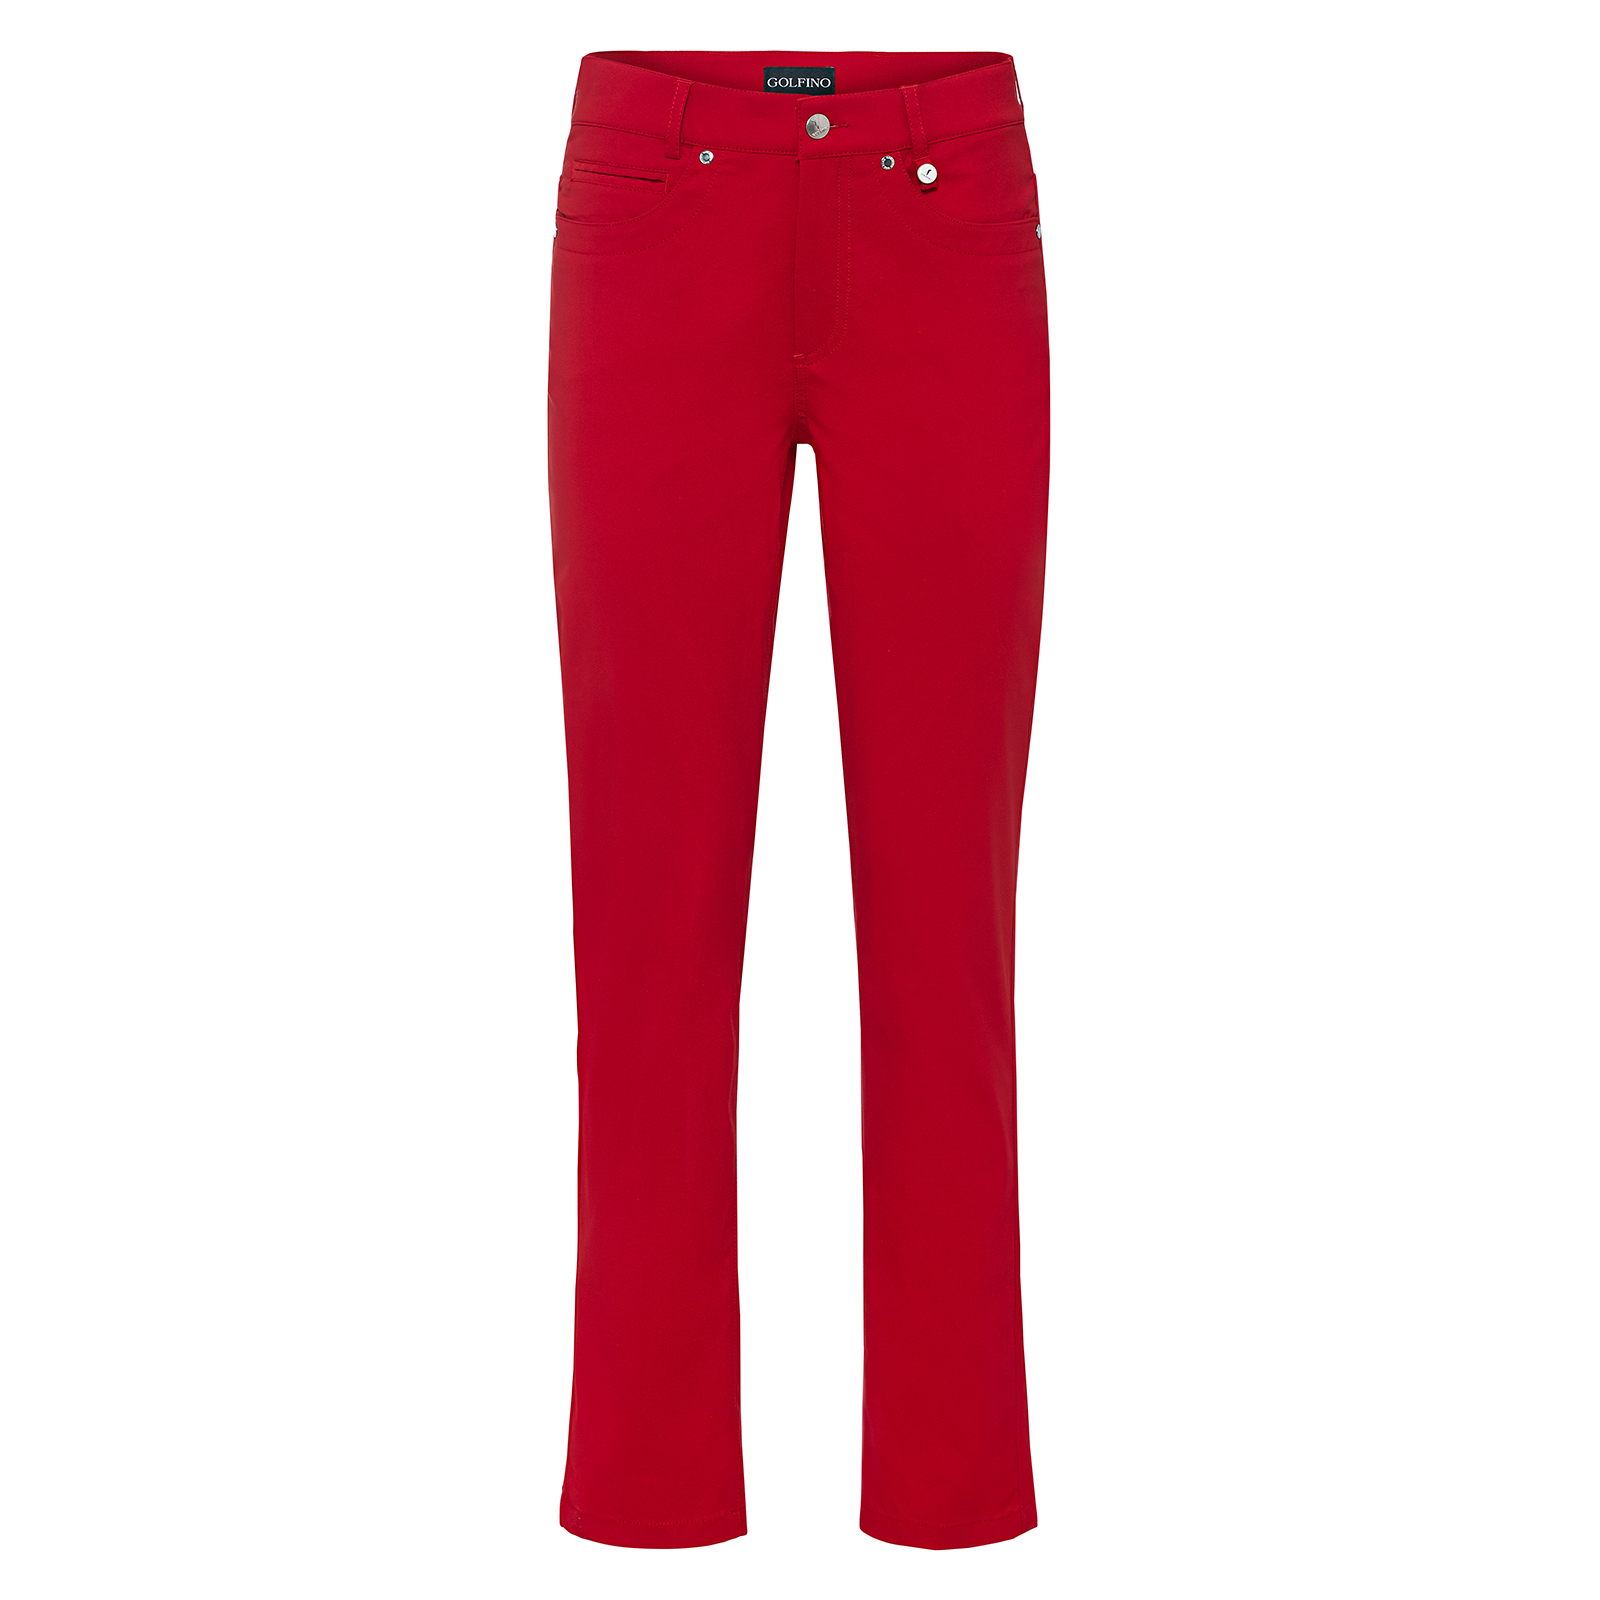 Ladies' 7/8 trousers in casual 5-pocket style 